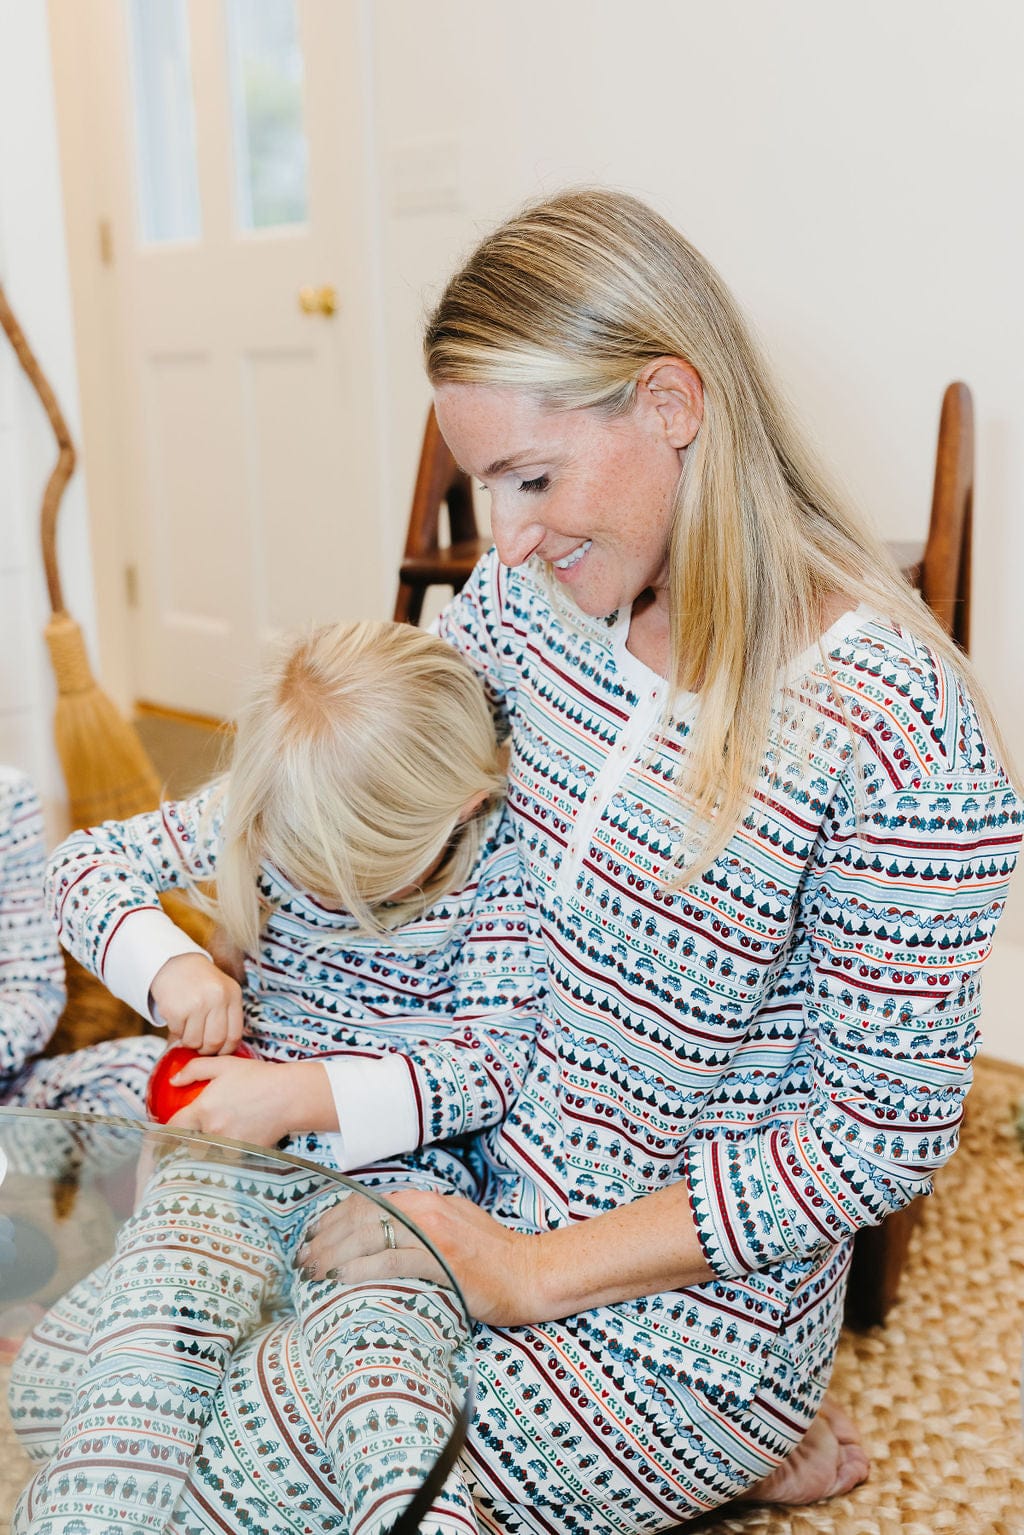 A sweet and heartwarming moment captured as a mother and her son, both wear cozy pajamas